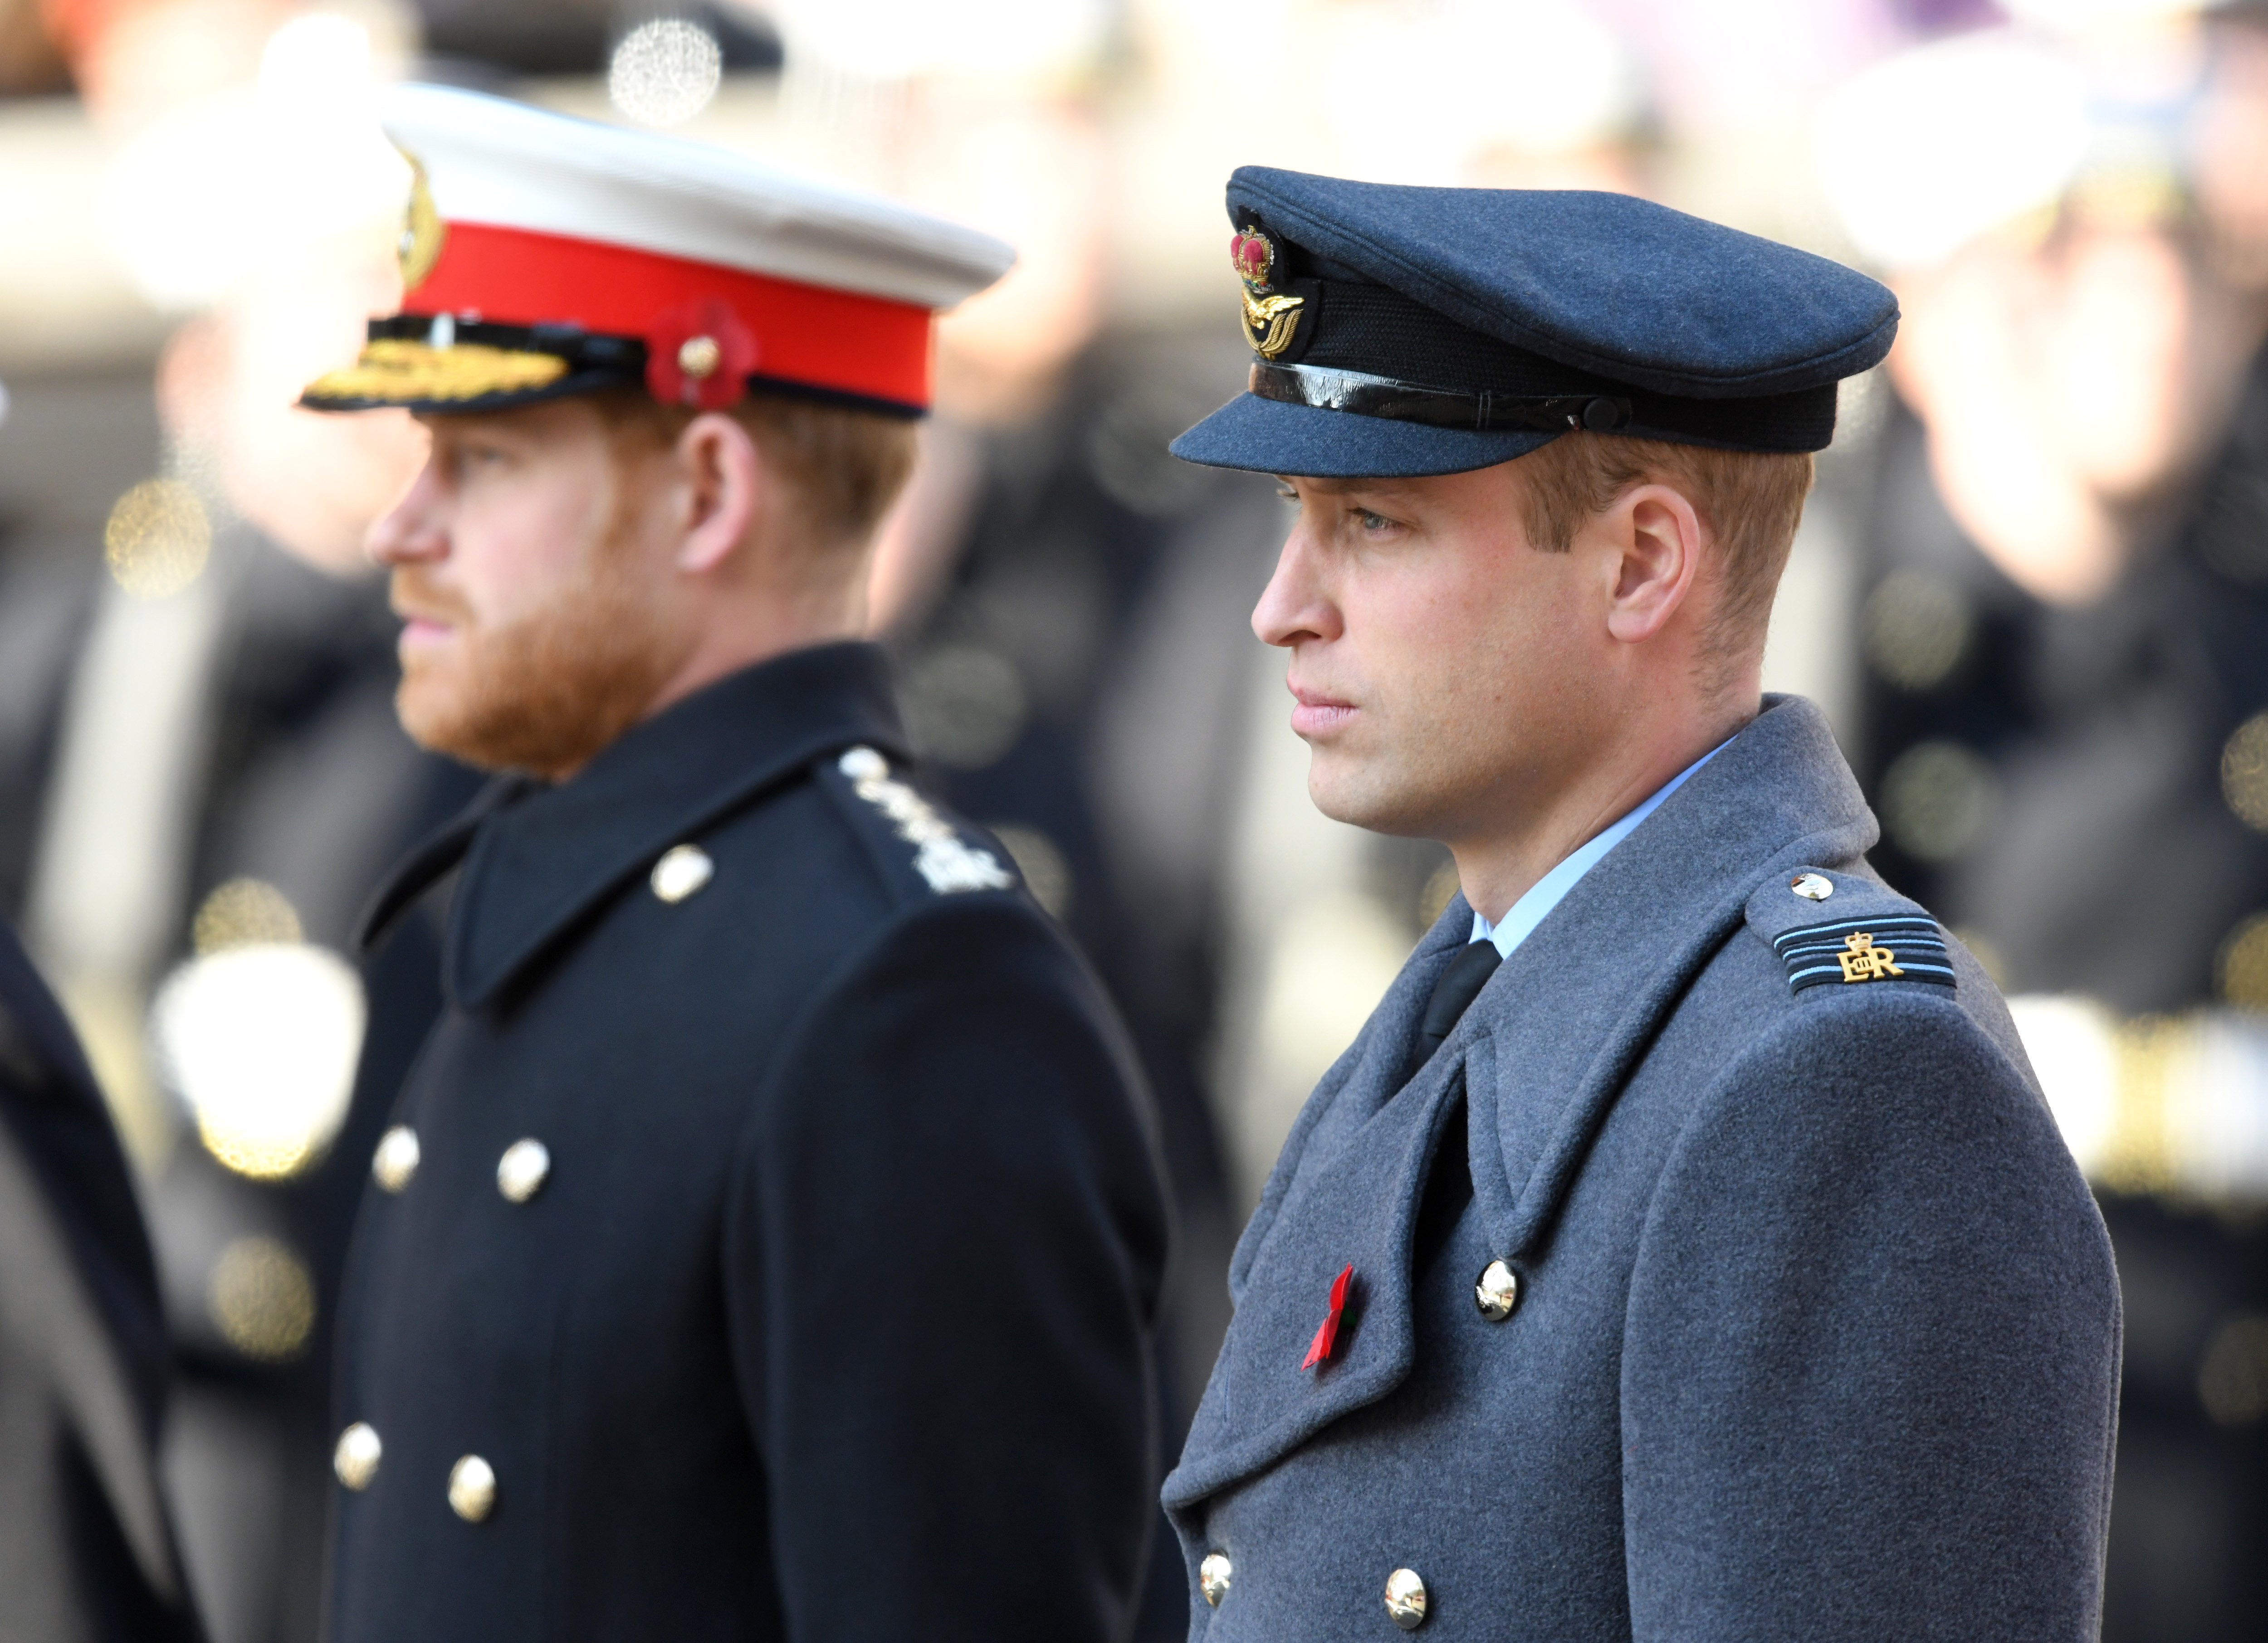 Prince Harry and Prince William at the annual Remembrance Sunday memorial at The Cenotaph on November 10, 2019 in London, England. | Source: Getty Images